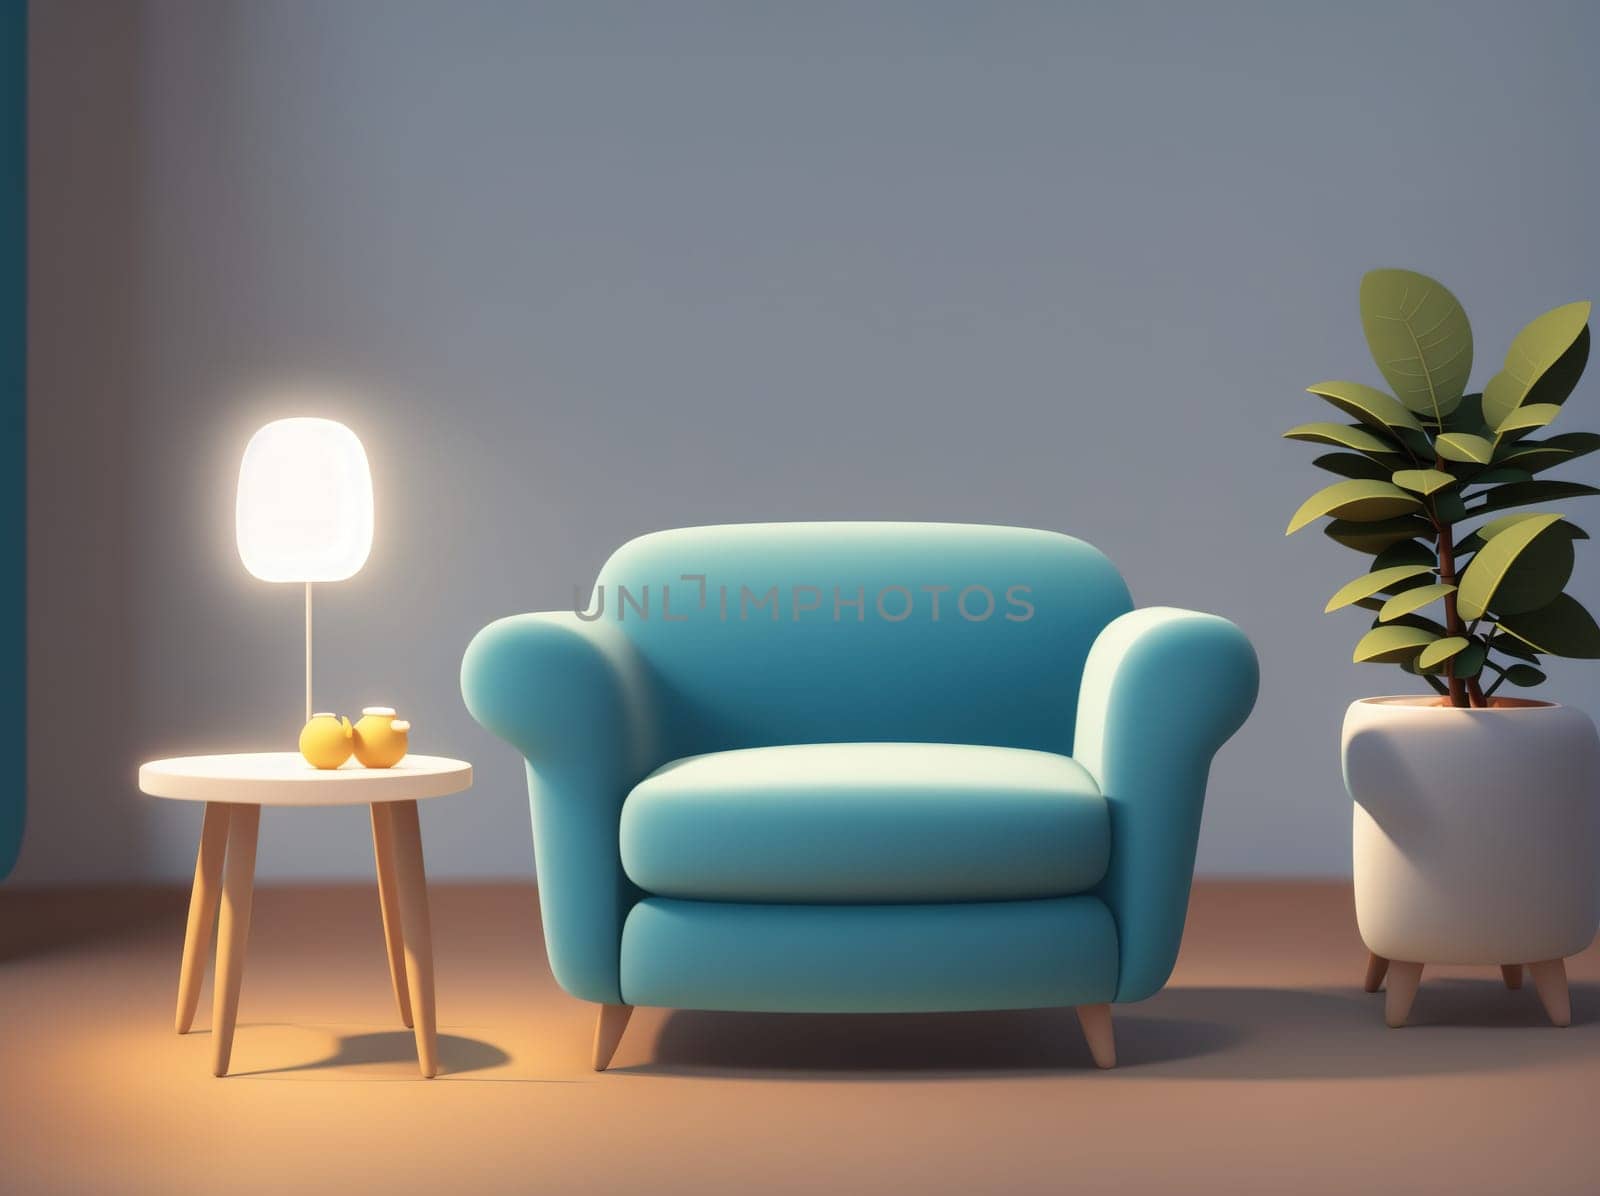 The image is a 3D rendering of a living room with a blue couch, a table with a plant on it, and a lamp on the floor.